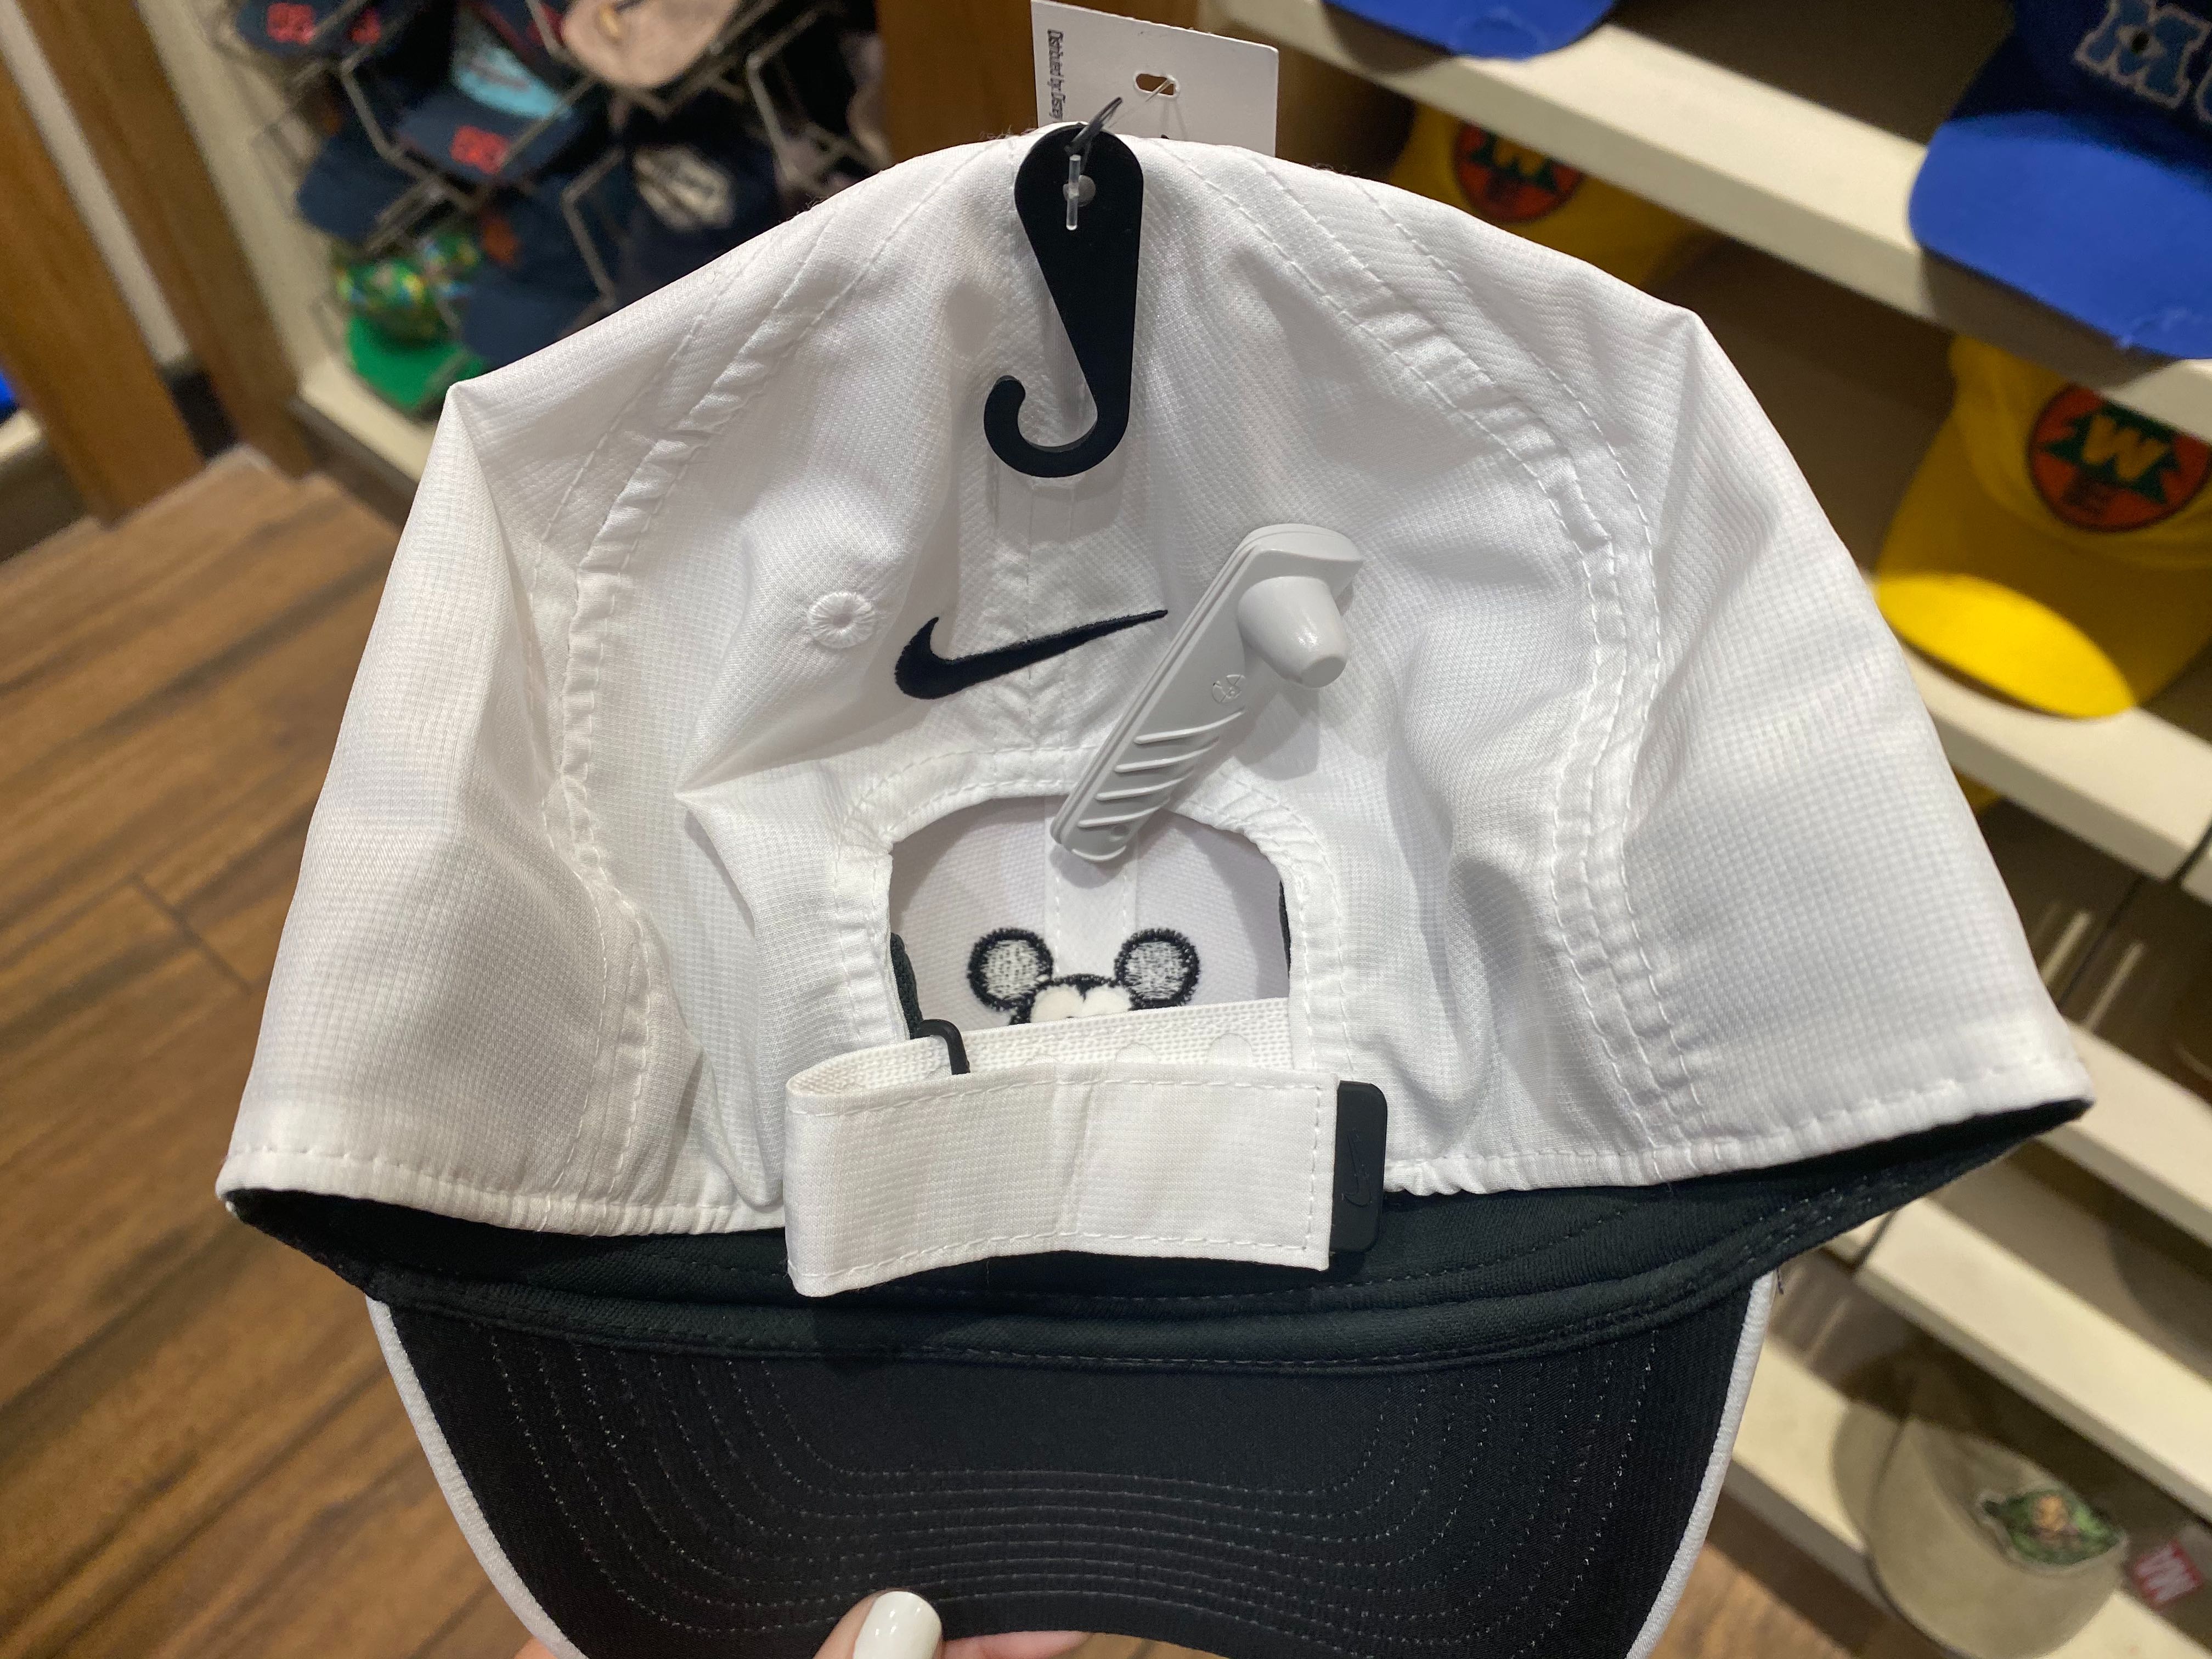 mickey mouse performance baseball cap for adults by nike